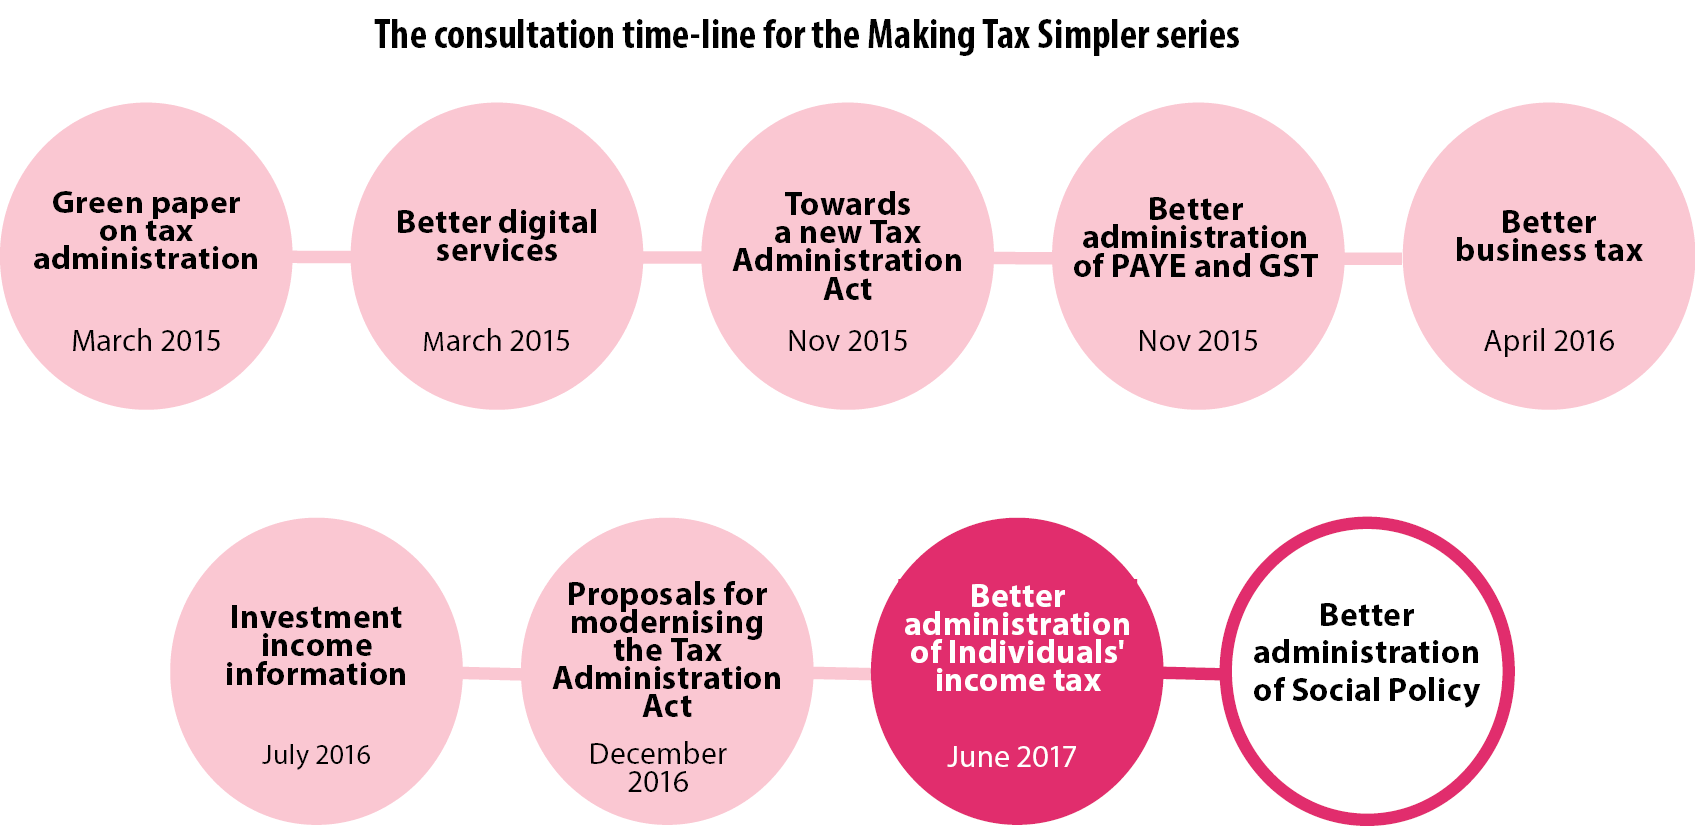 The consultation timeline for the Making Tax Simpler series